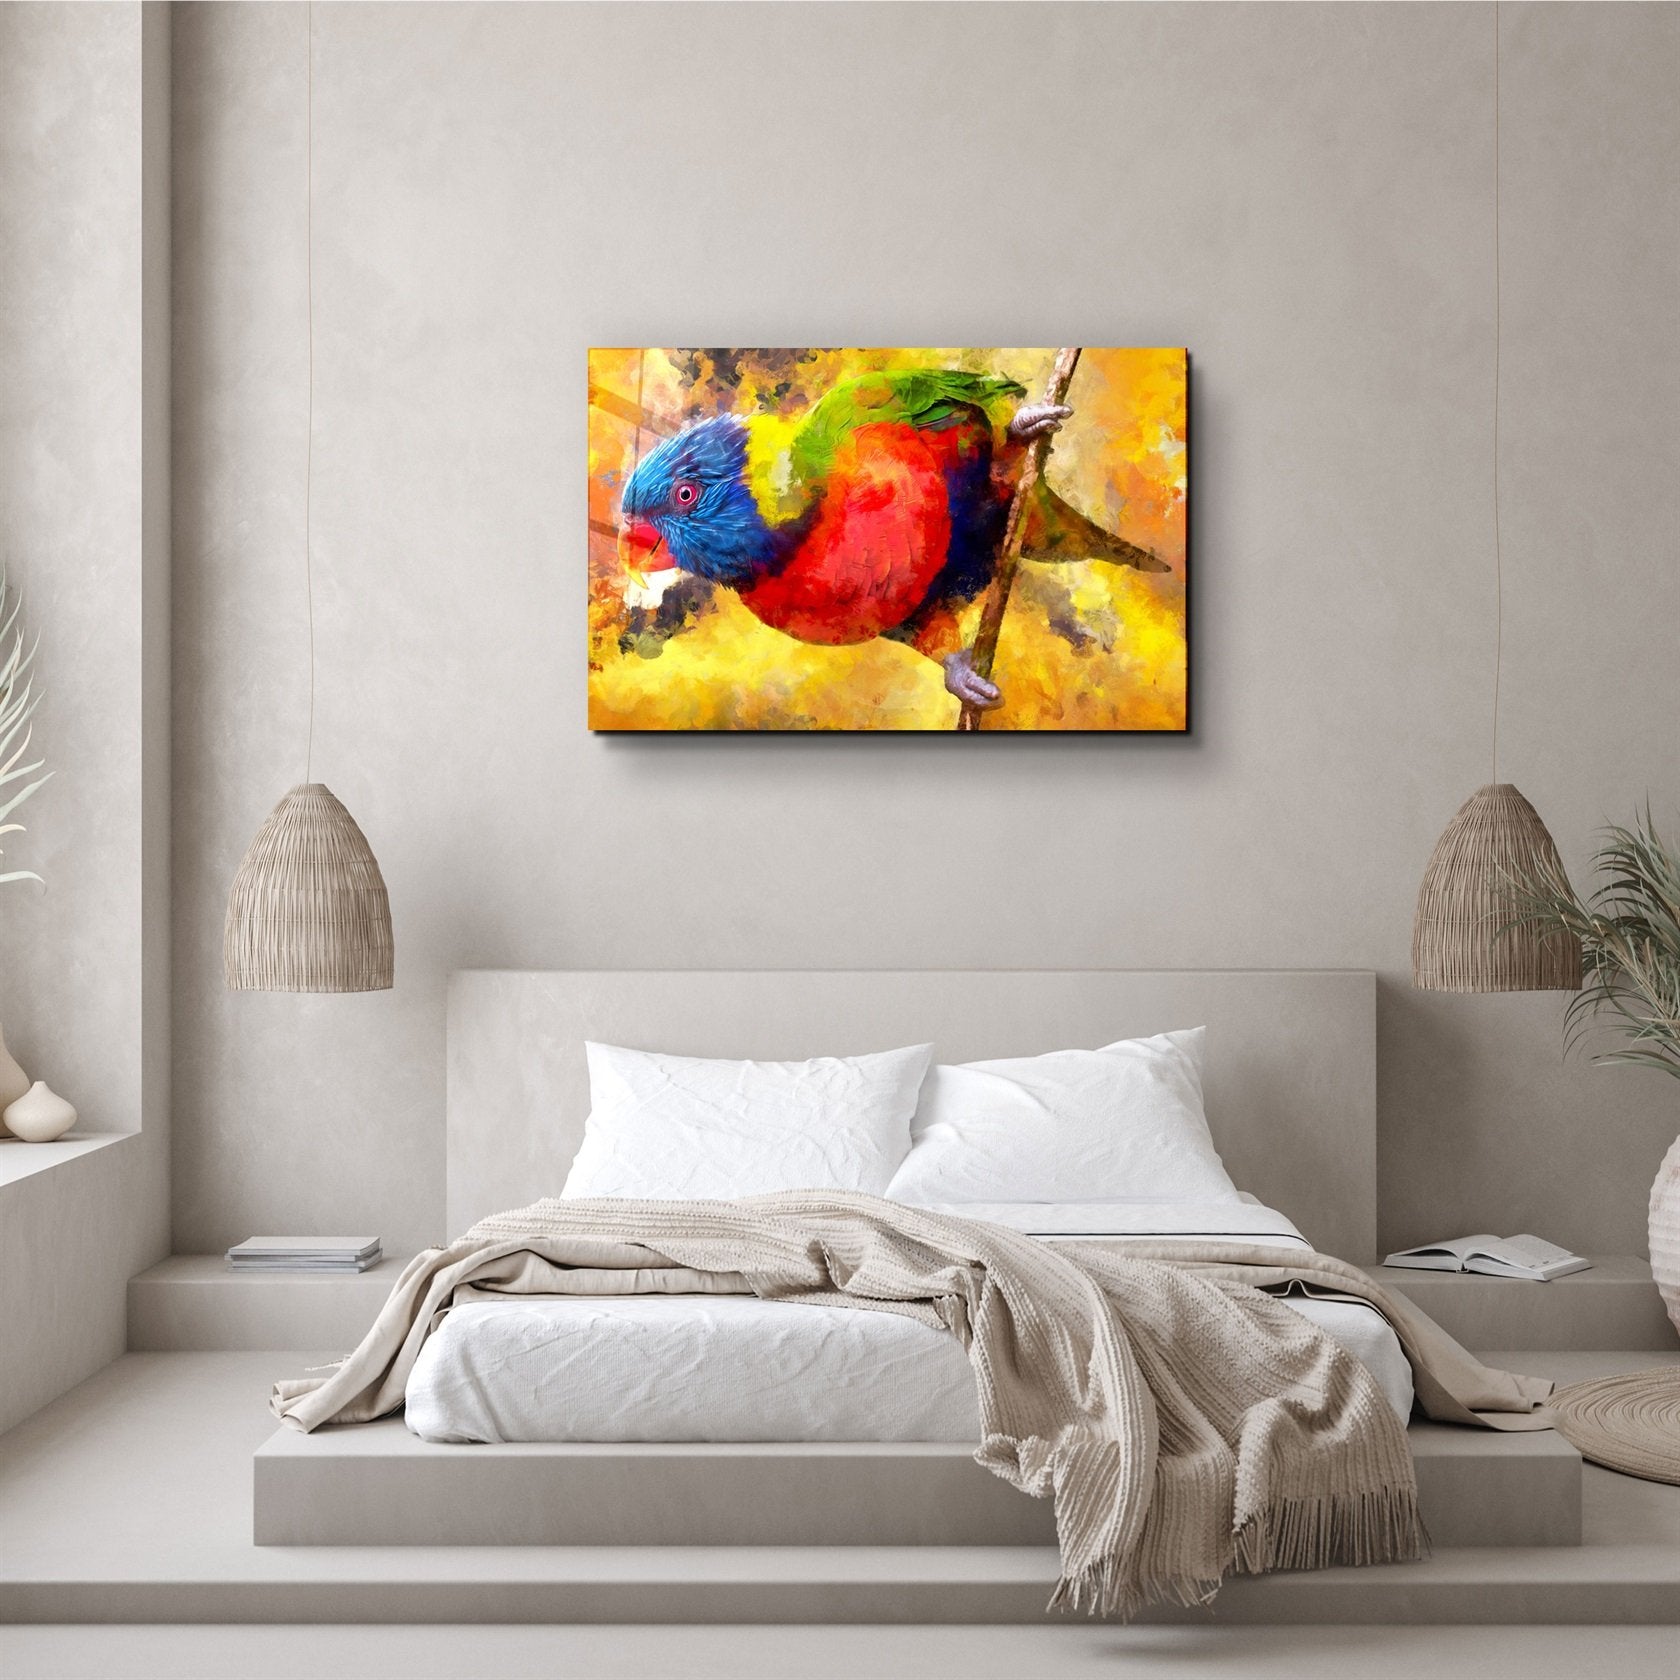 ・"Abstract Colorful Parrot"・Glass Wall Art